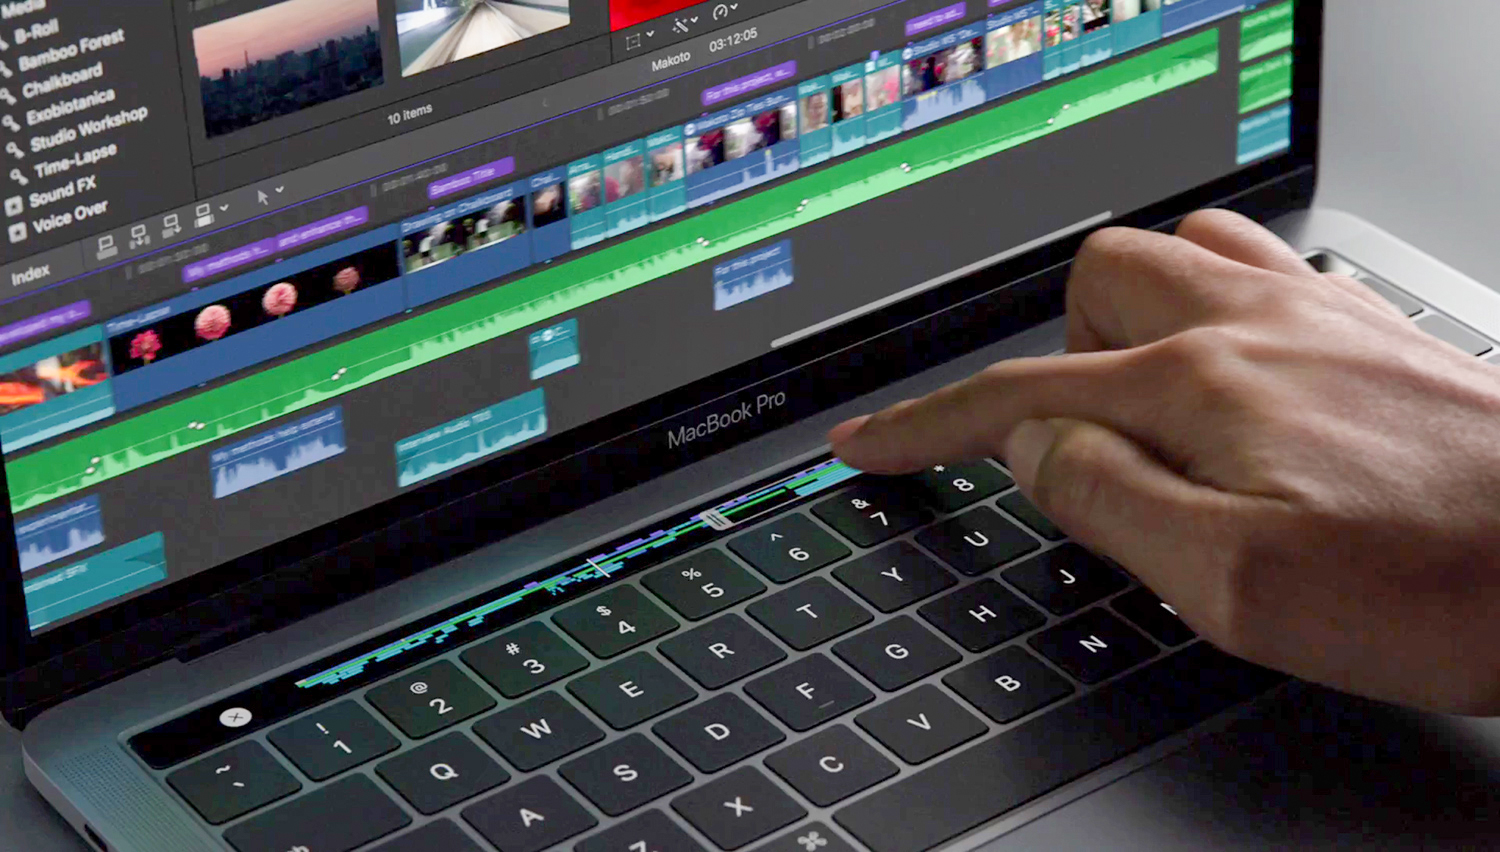 Wait, There's Still a Touch Bar on the New MacBook Pro?